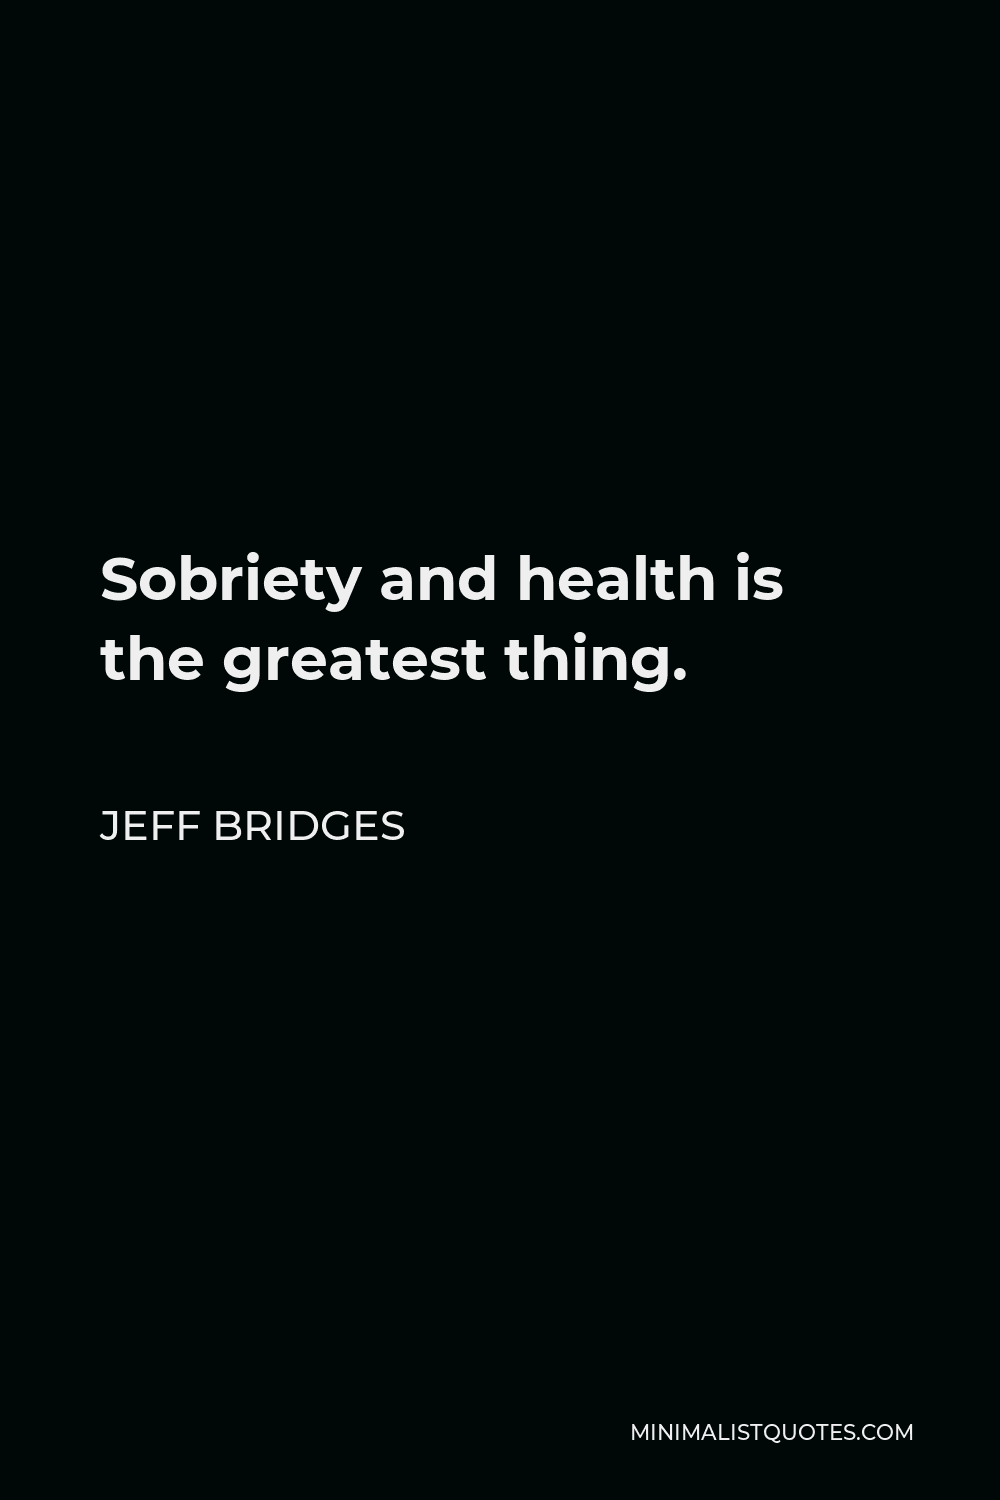 Jeff Bridges Quote - Sobriety and health is the greatest thing.